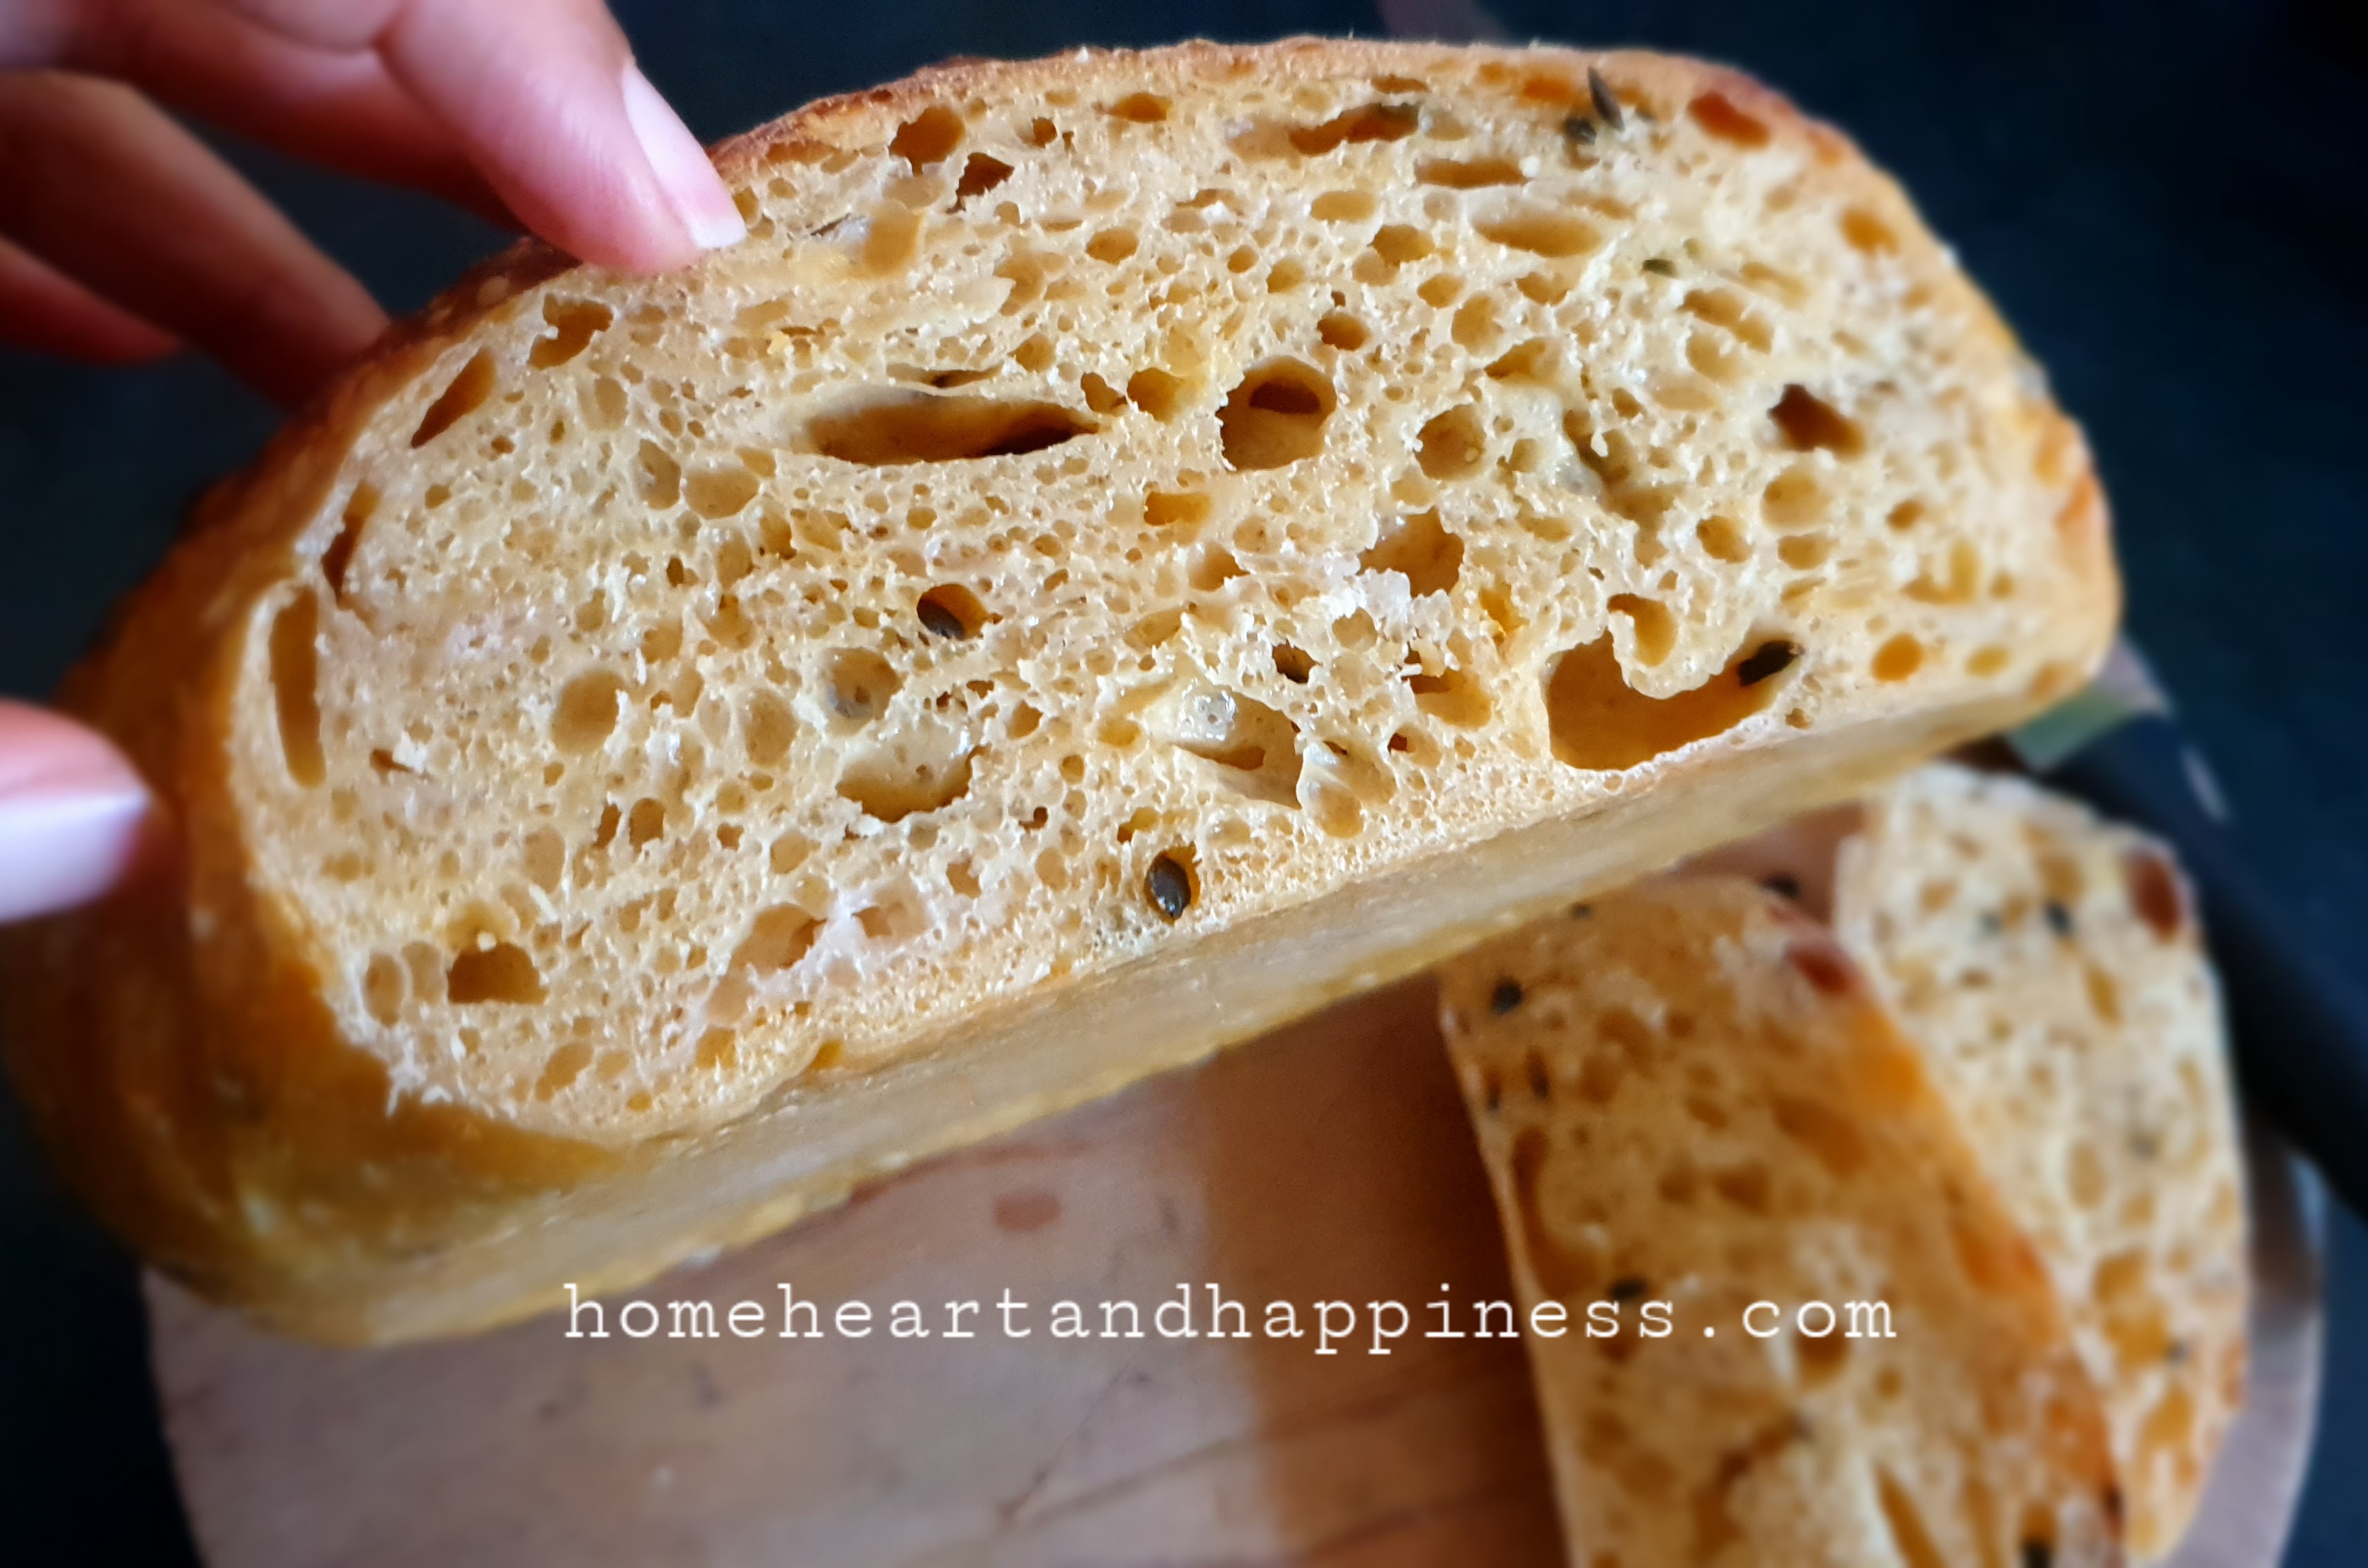 Passionate Passion fruit Sourdough.
Subscriber only recipe